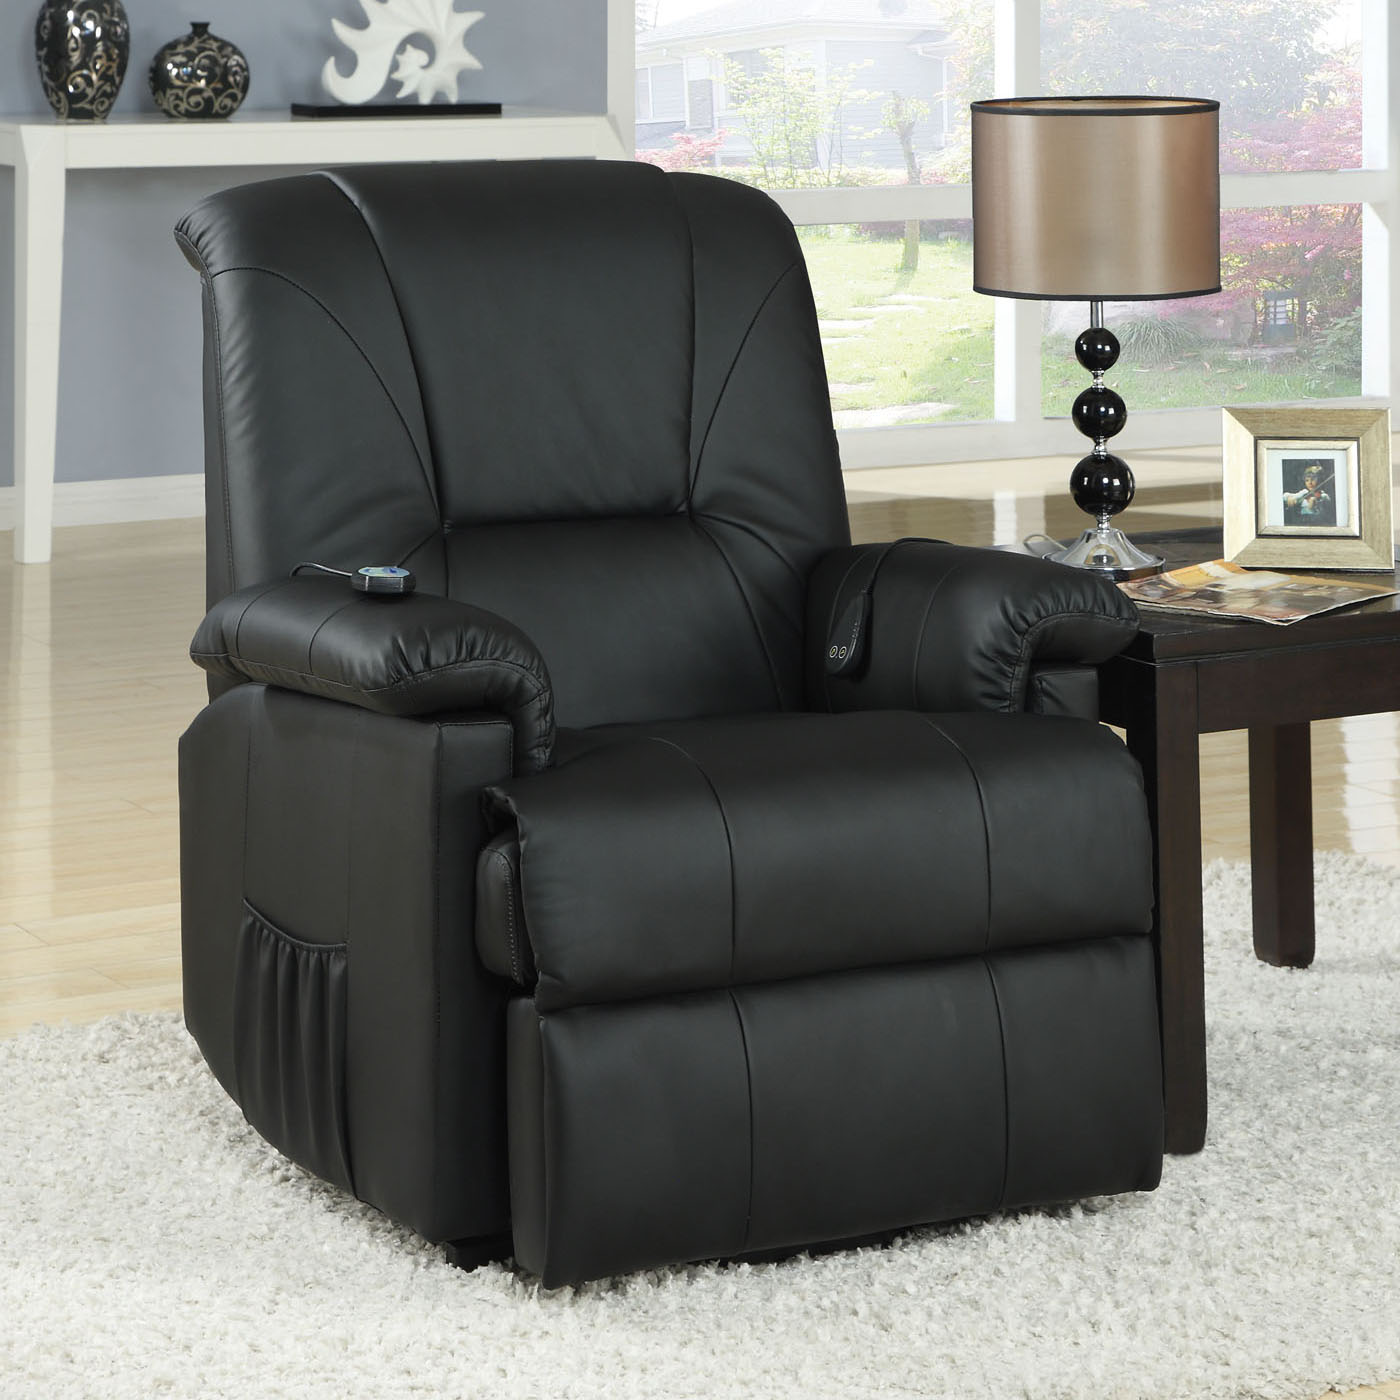 32" X 33" X 40" Brown Pu Recliner With Power Lift And Massage